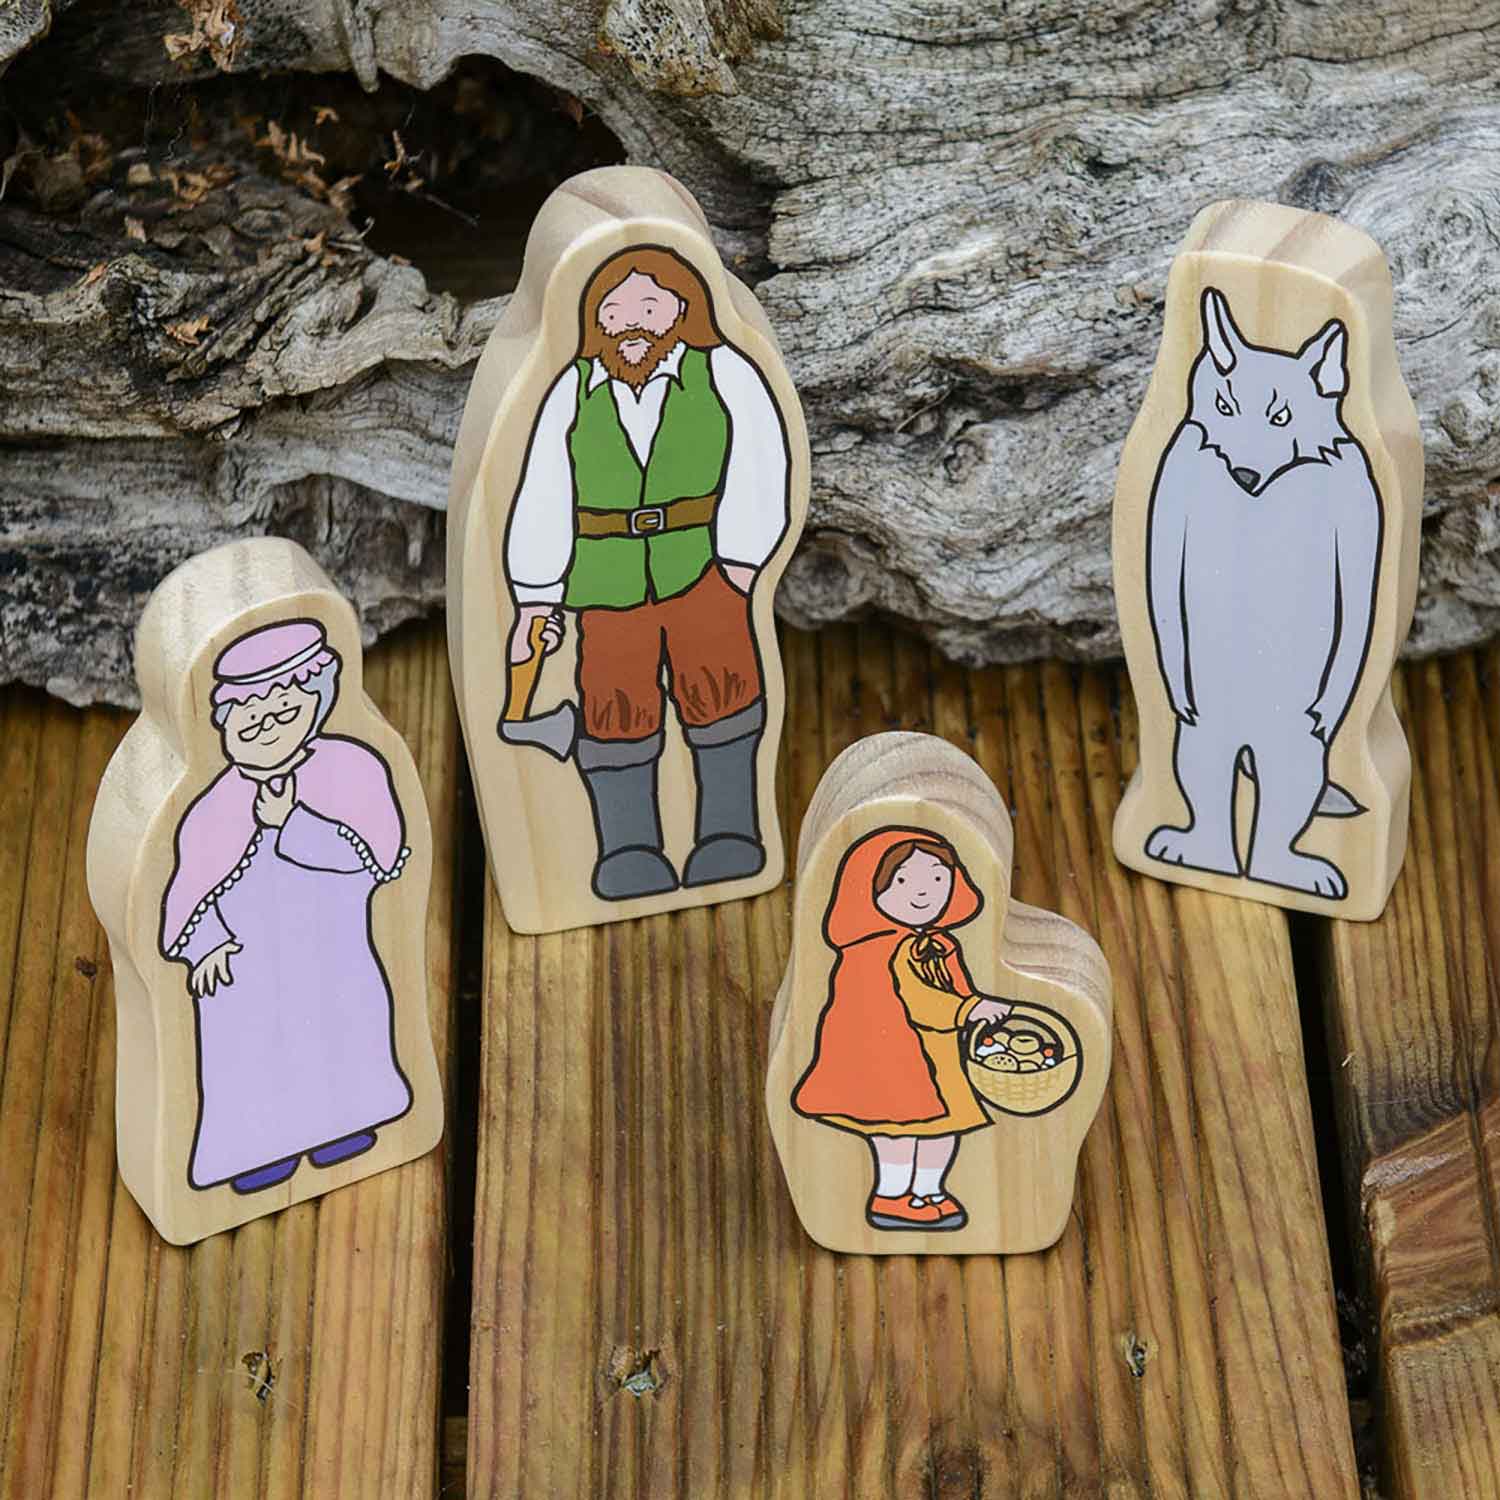 Fairy Tale Wooden Character Set, Little Red Riding Hood